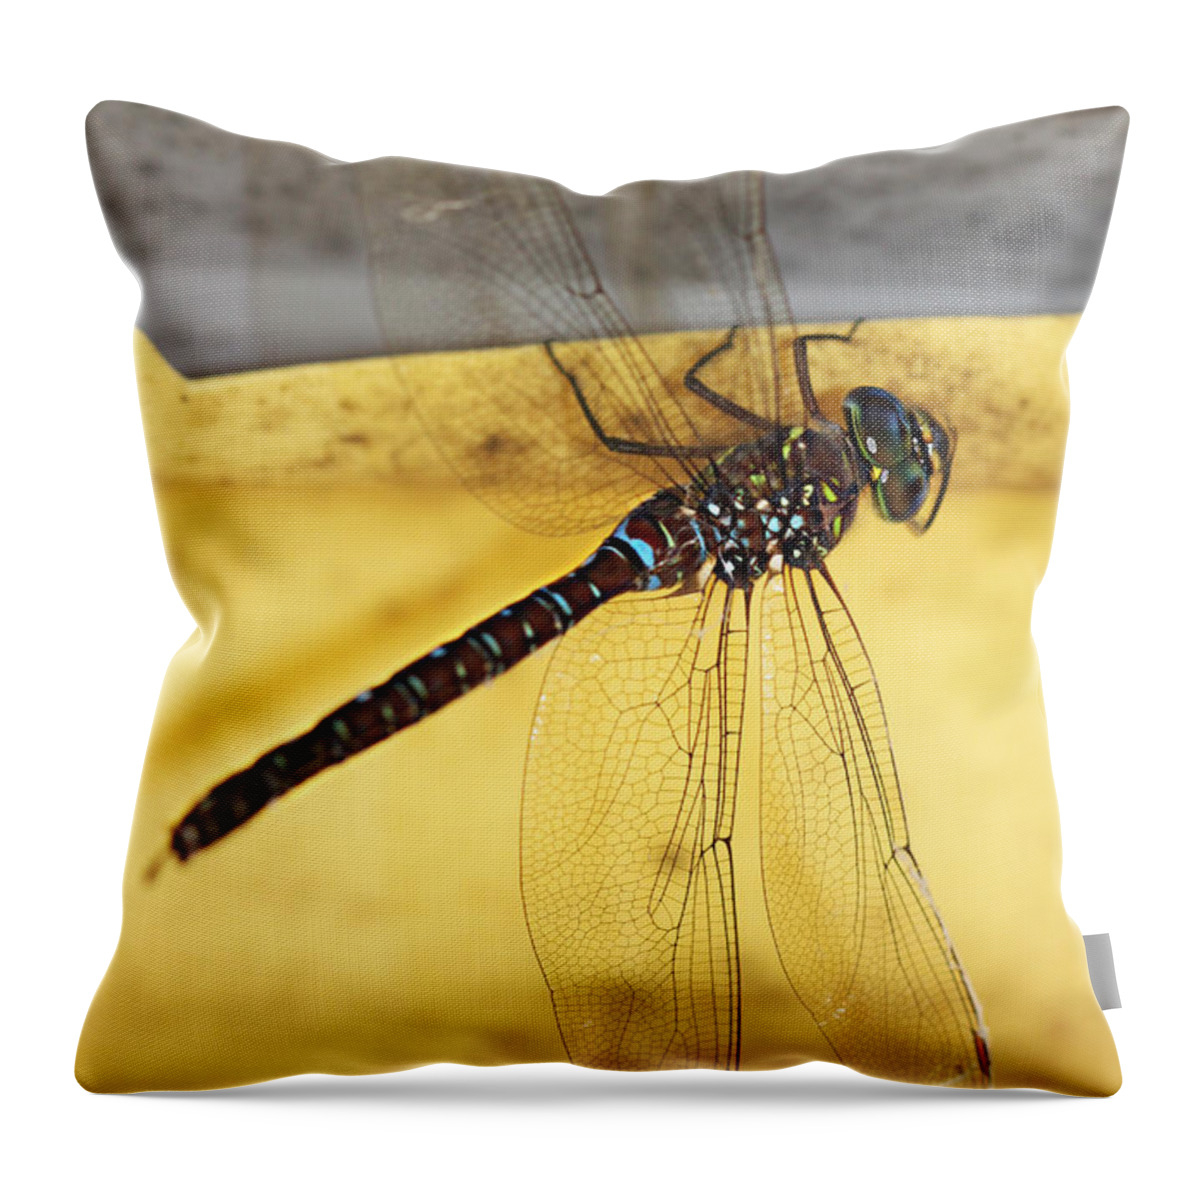 Dragonfly Throw Pillow featuring the photograph Dragonfly Web by Melanie Lankford Photography